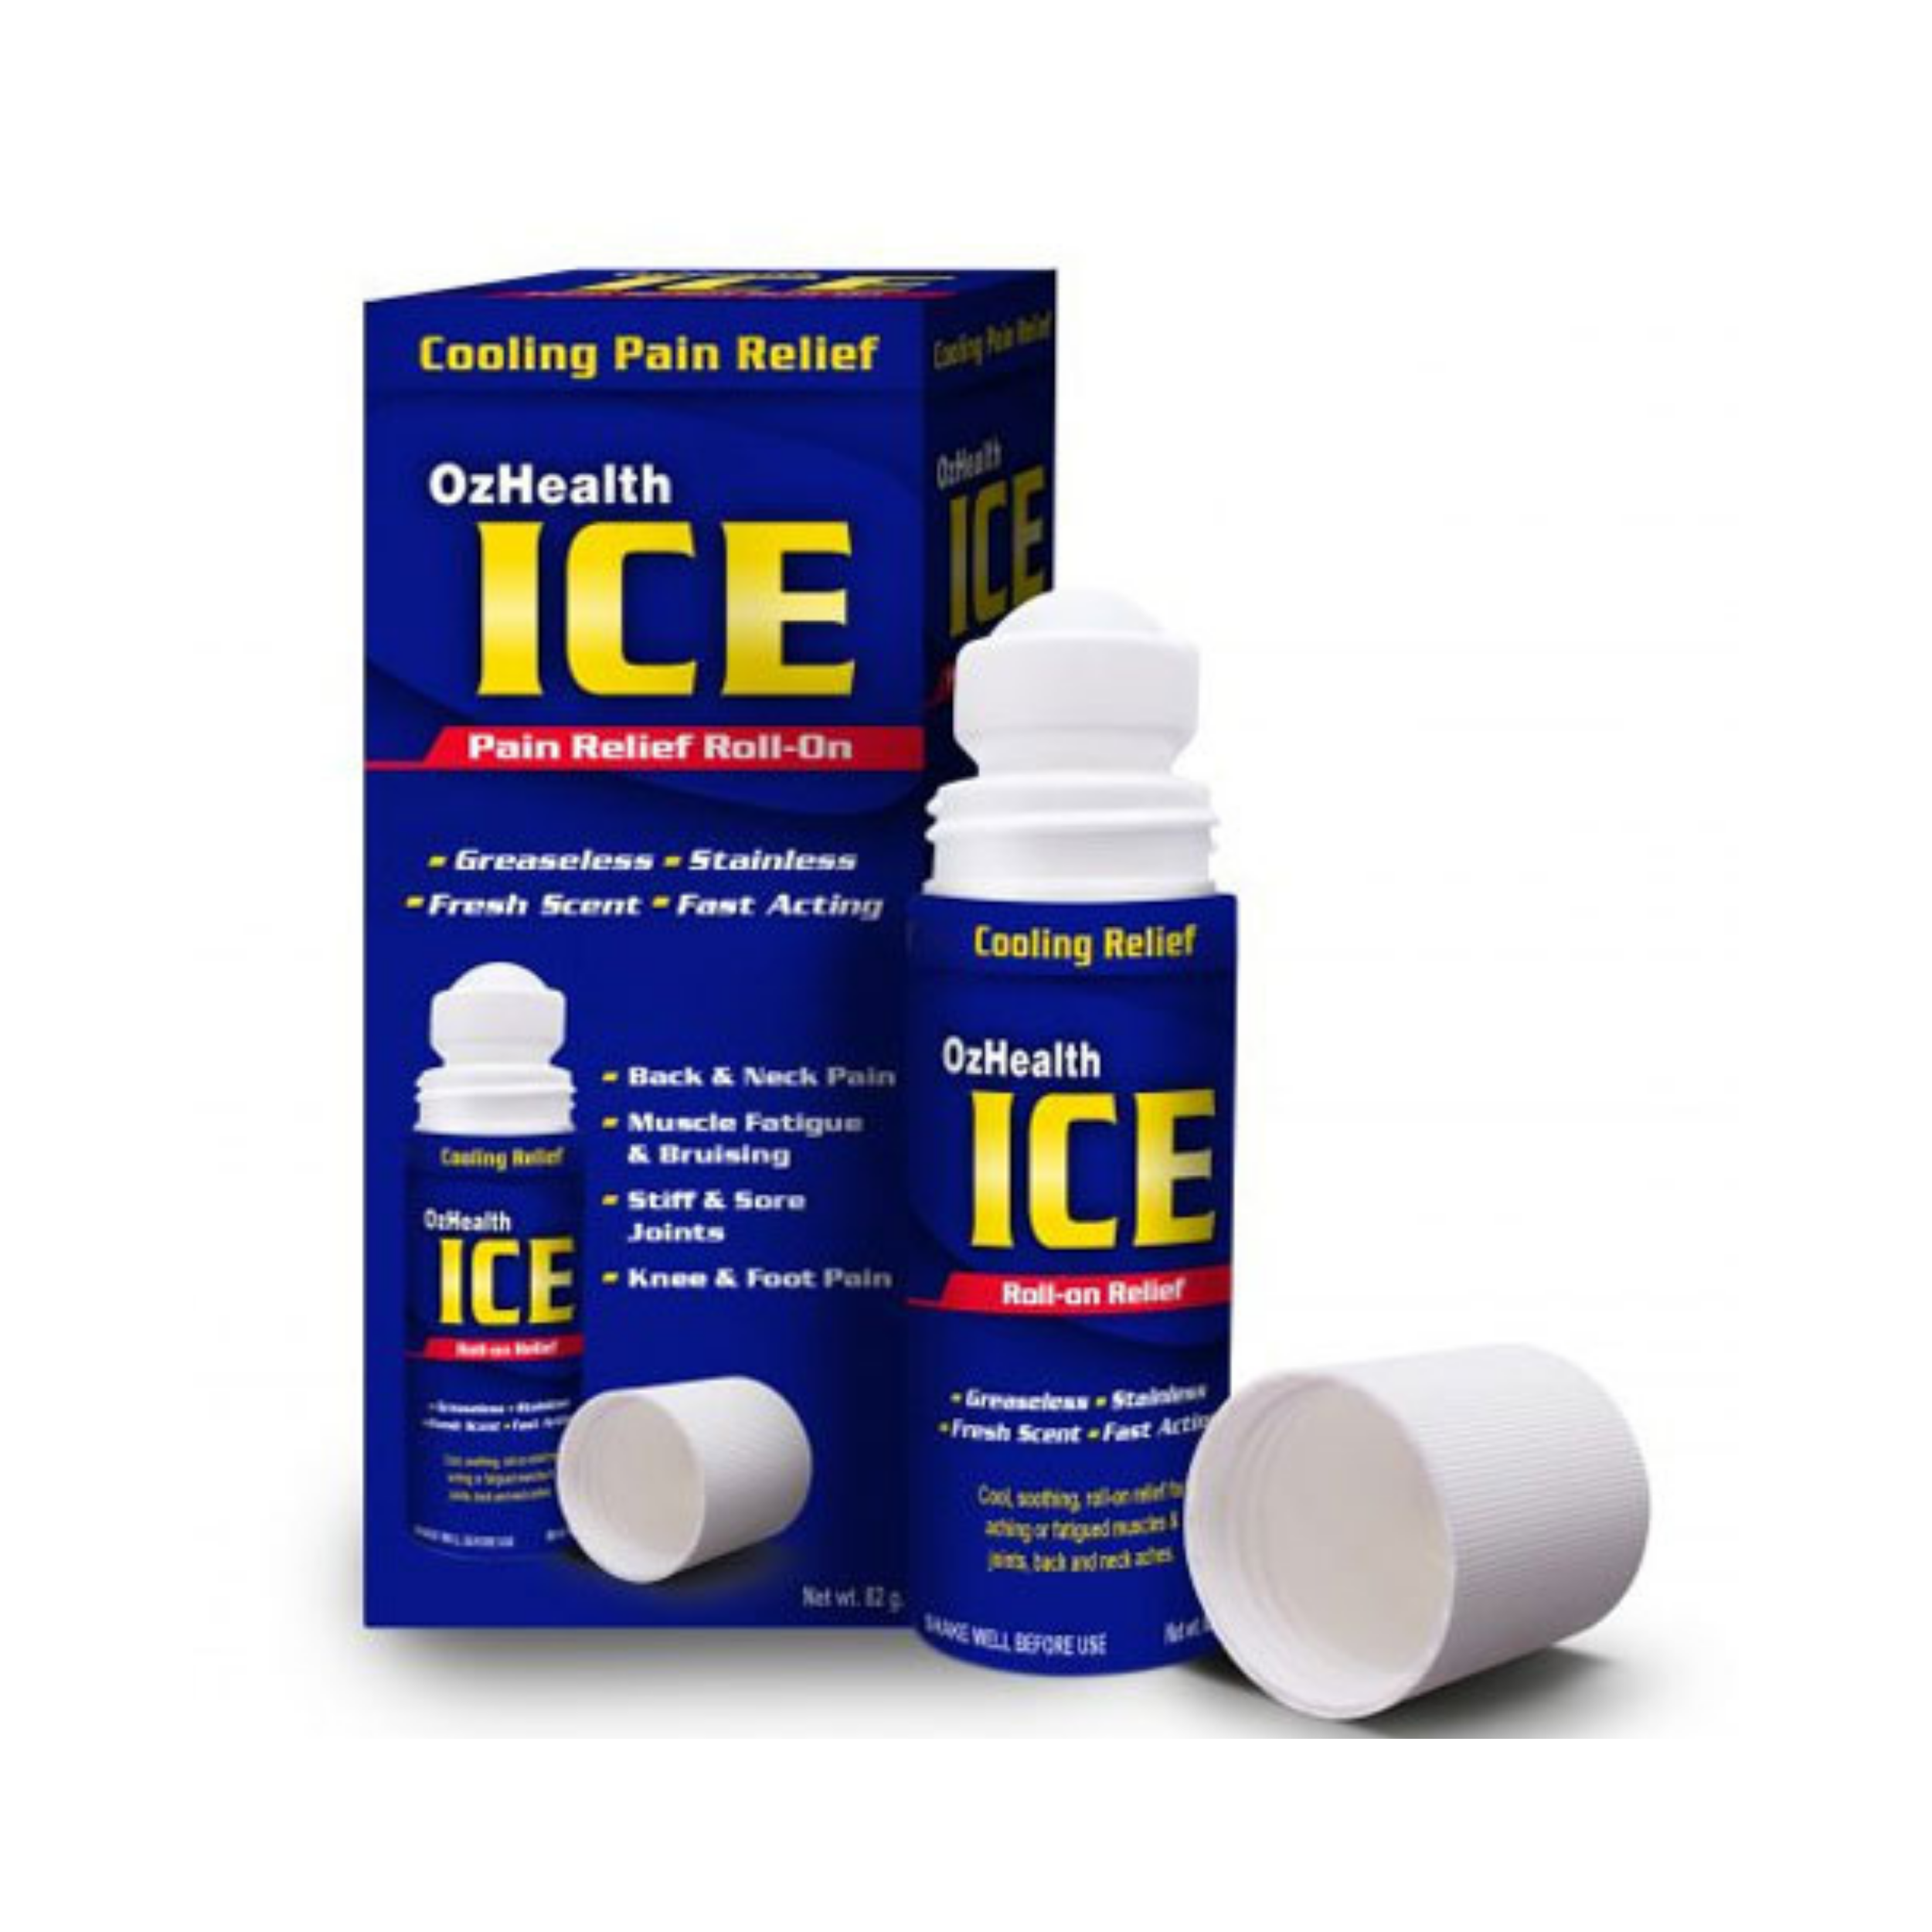 Ice Pain Relief Roll-On 82g